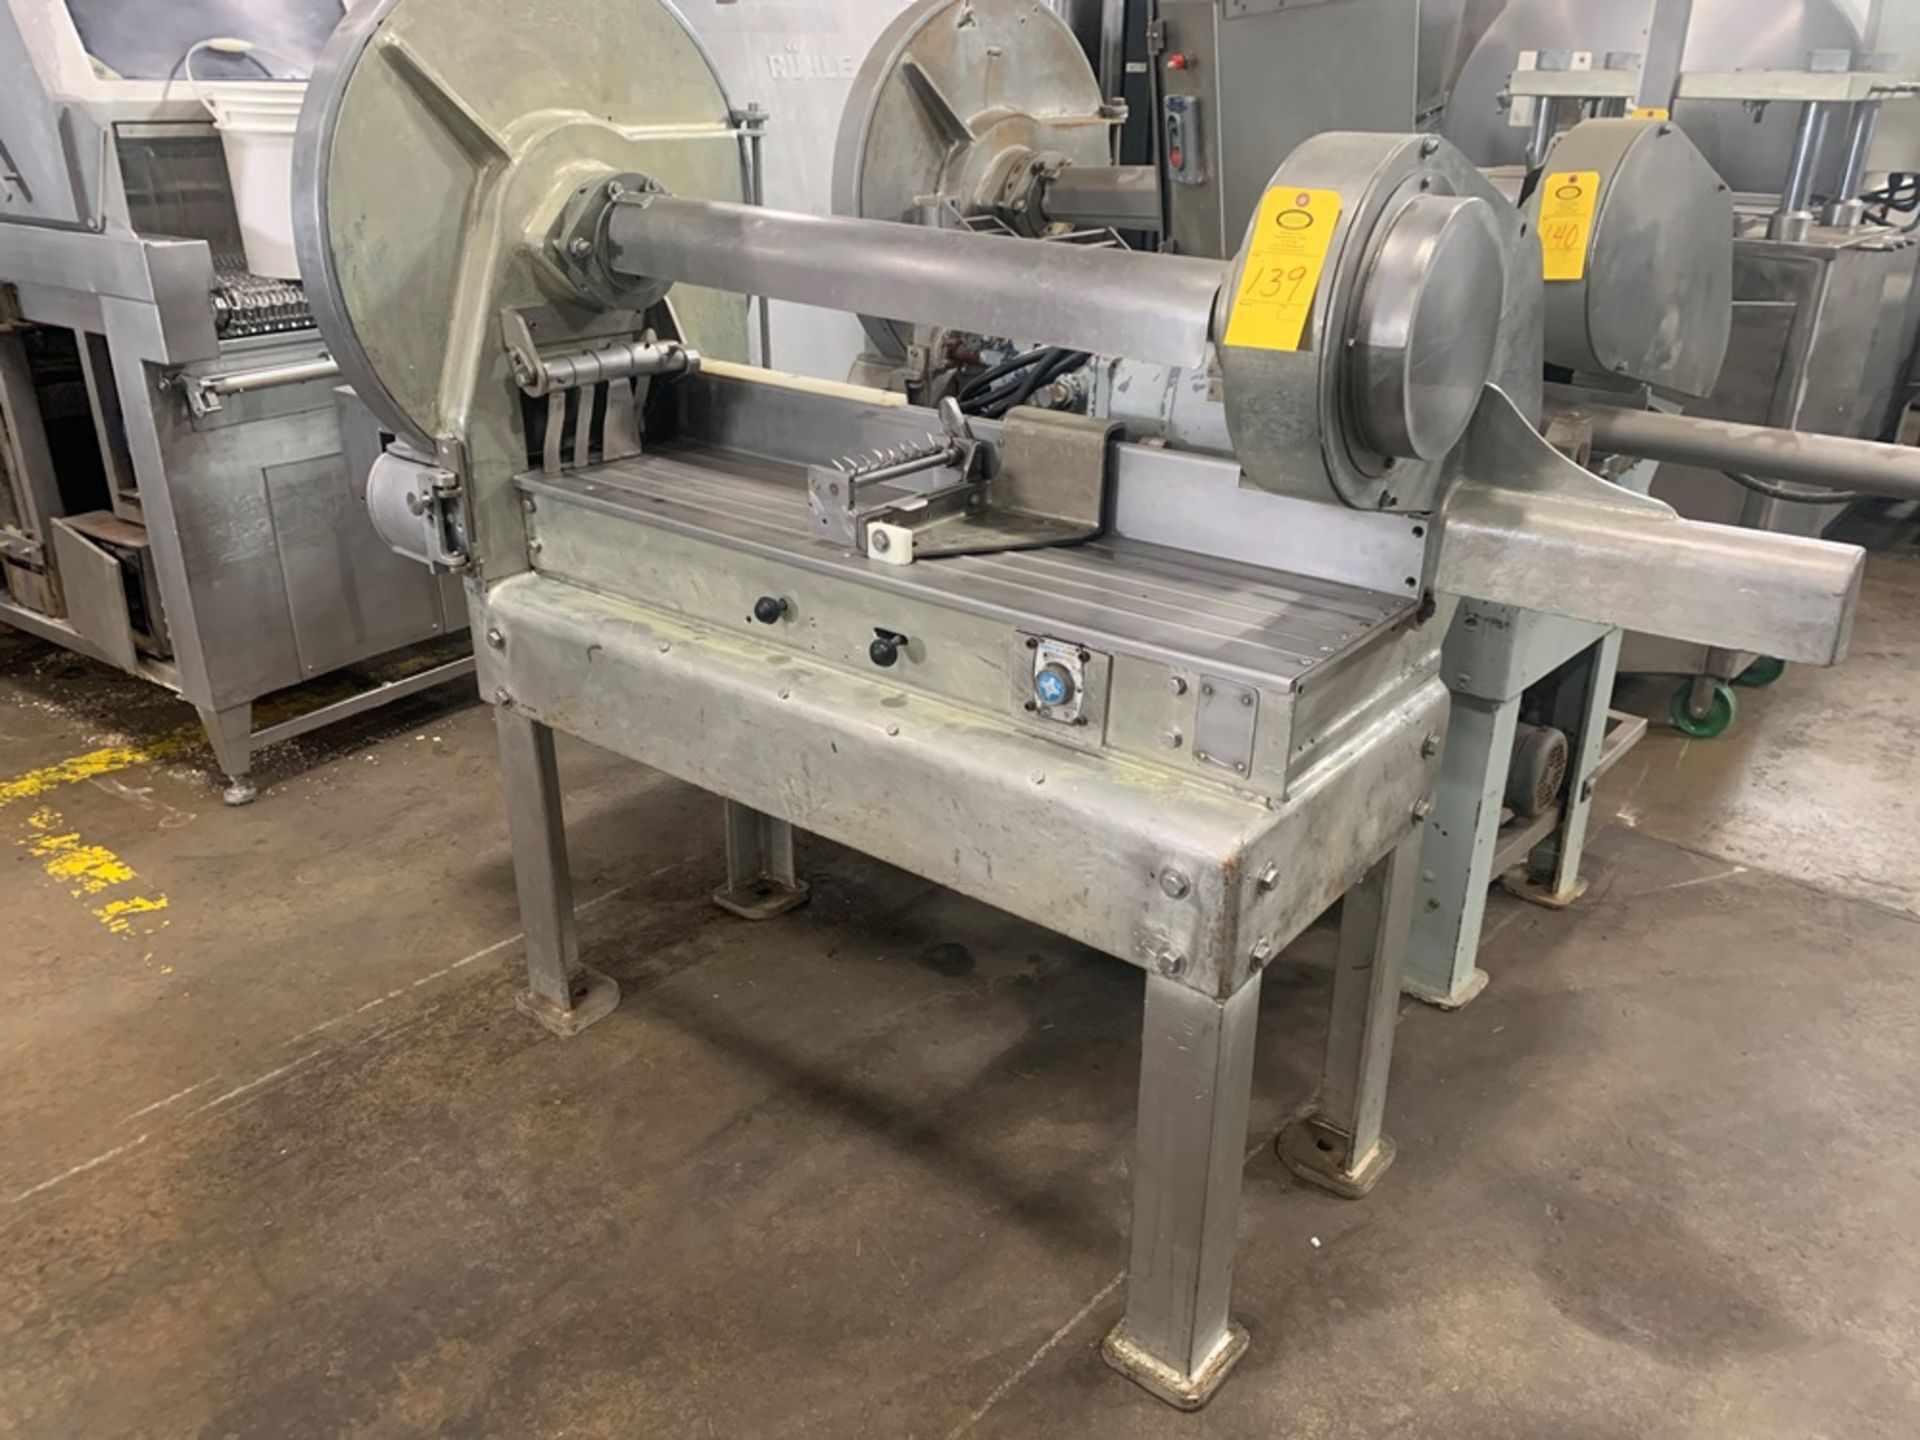 Anco Mdl. 827 Ram Feed Bacon Slicer, re-tinned (Located in Plano, IL) - Image 2 of 7